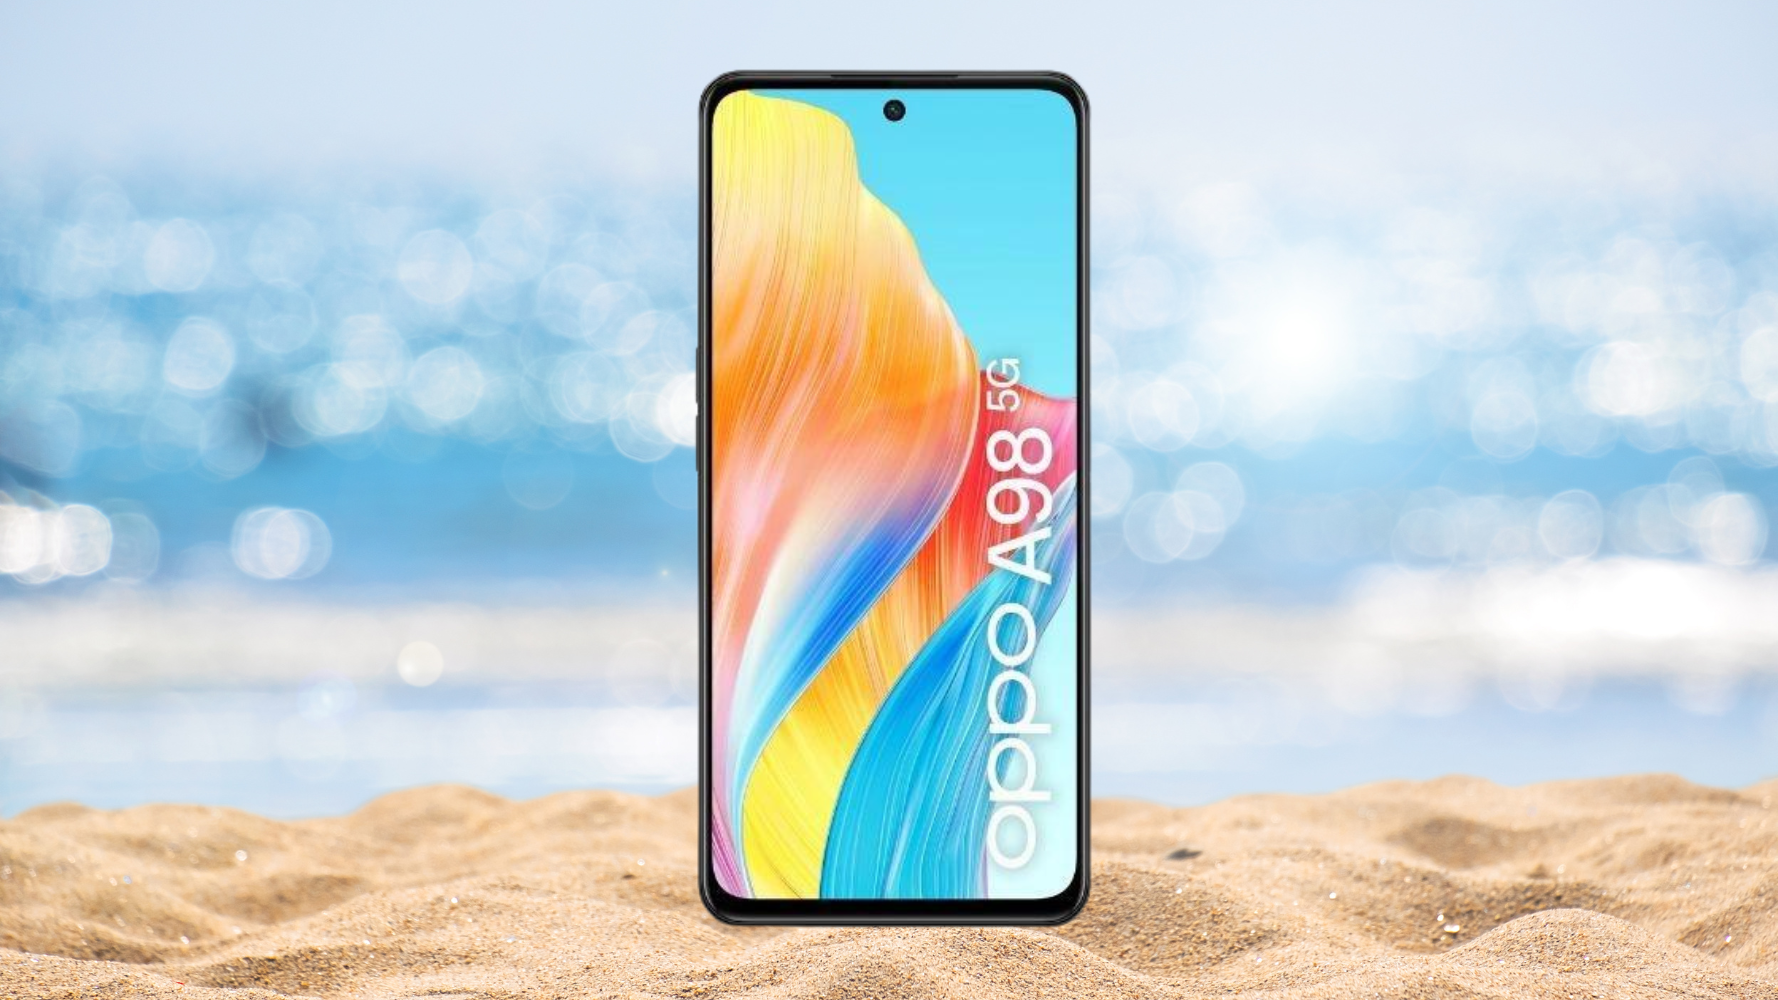 OPPO A98 5G Review - Jam Online  Philippines Tech News & Reviews